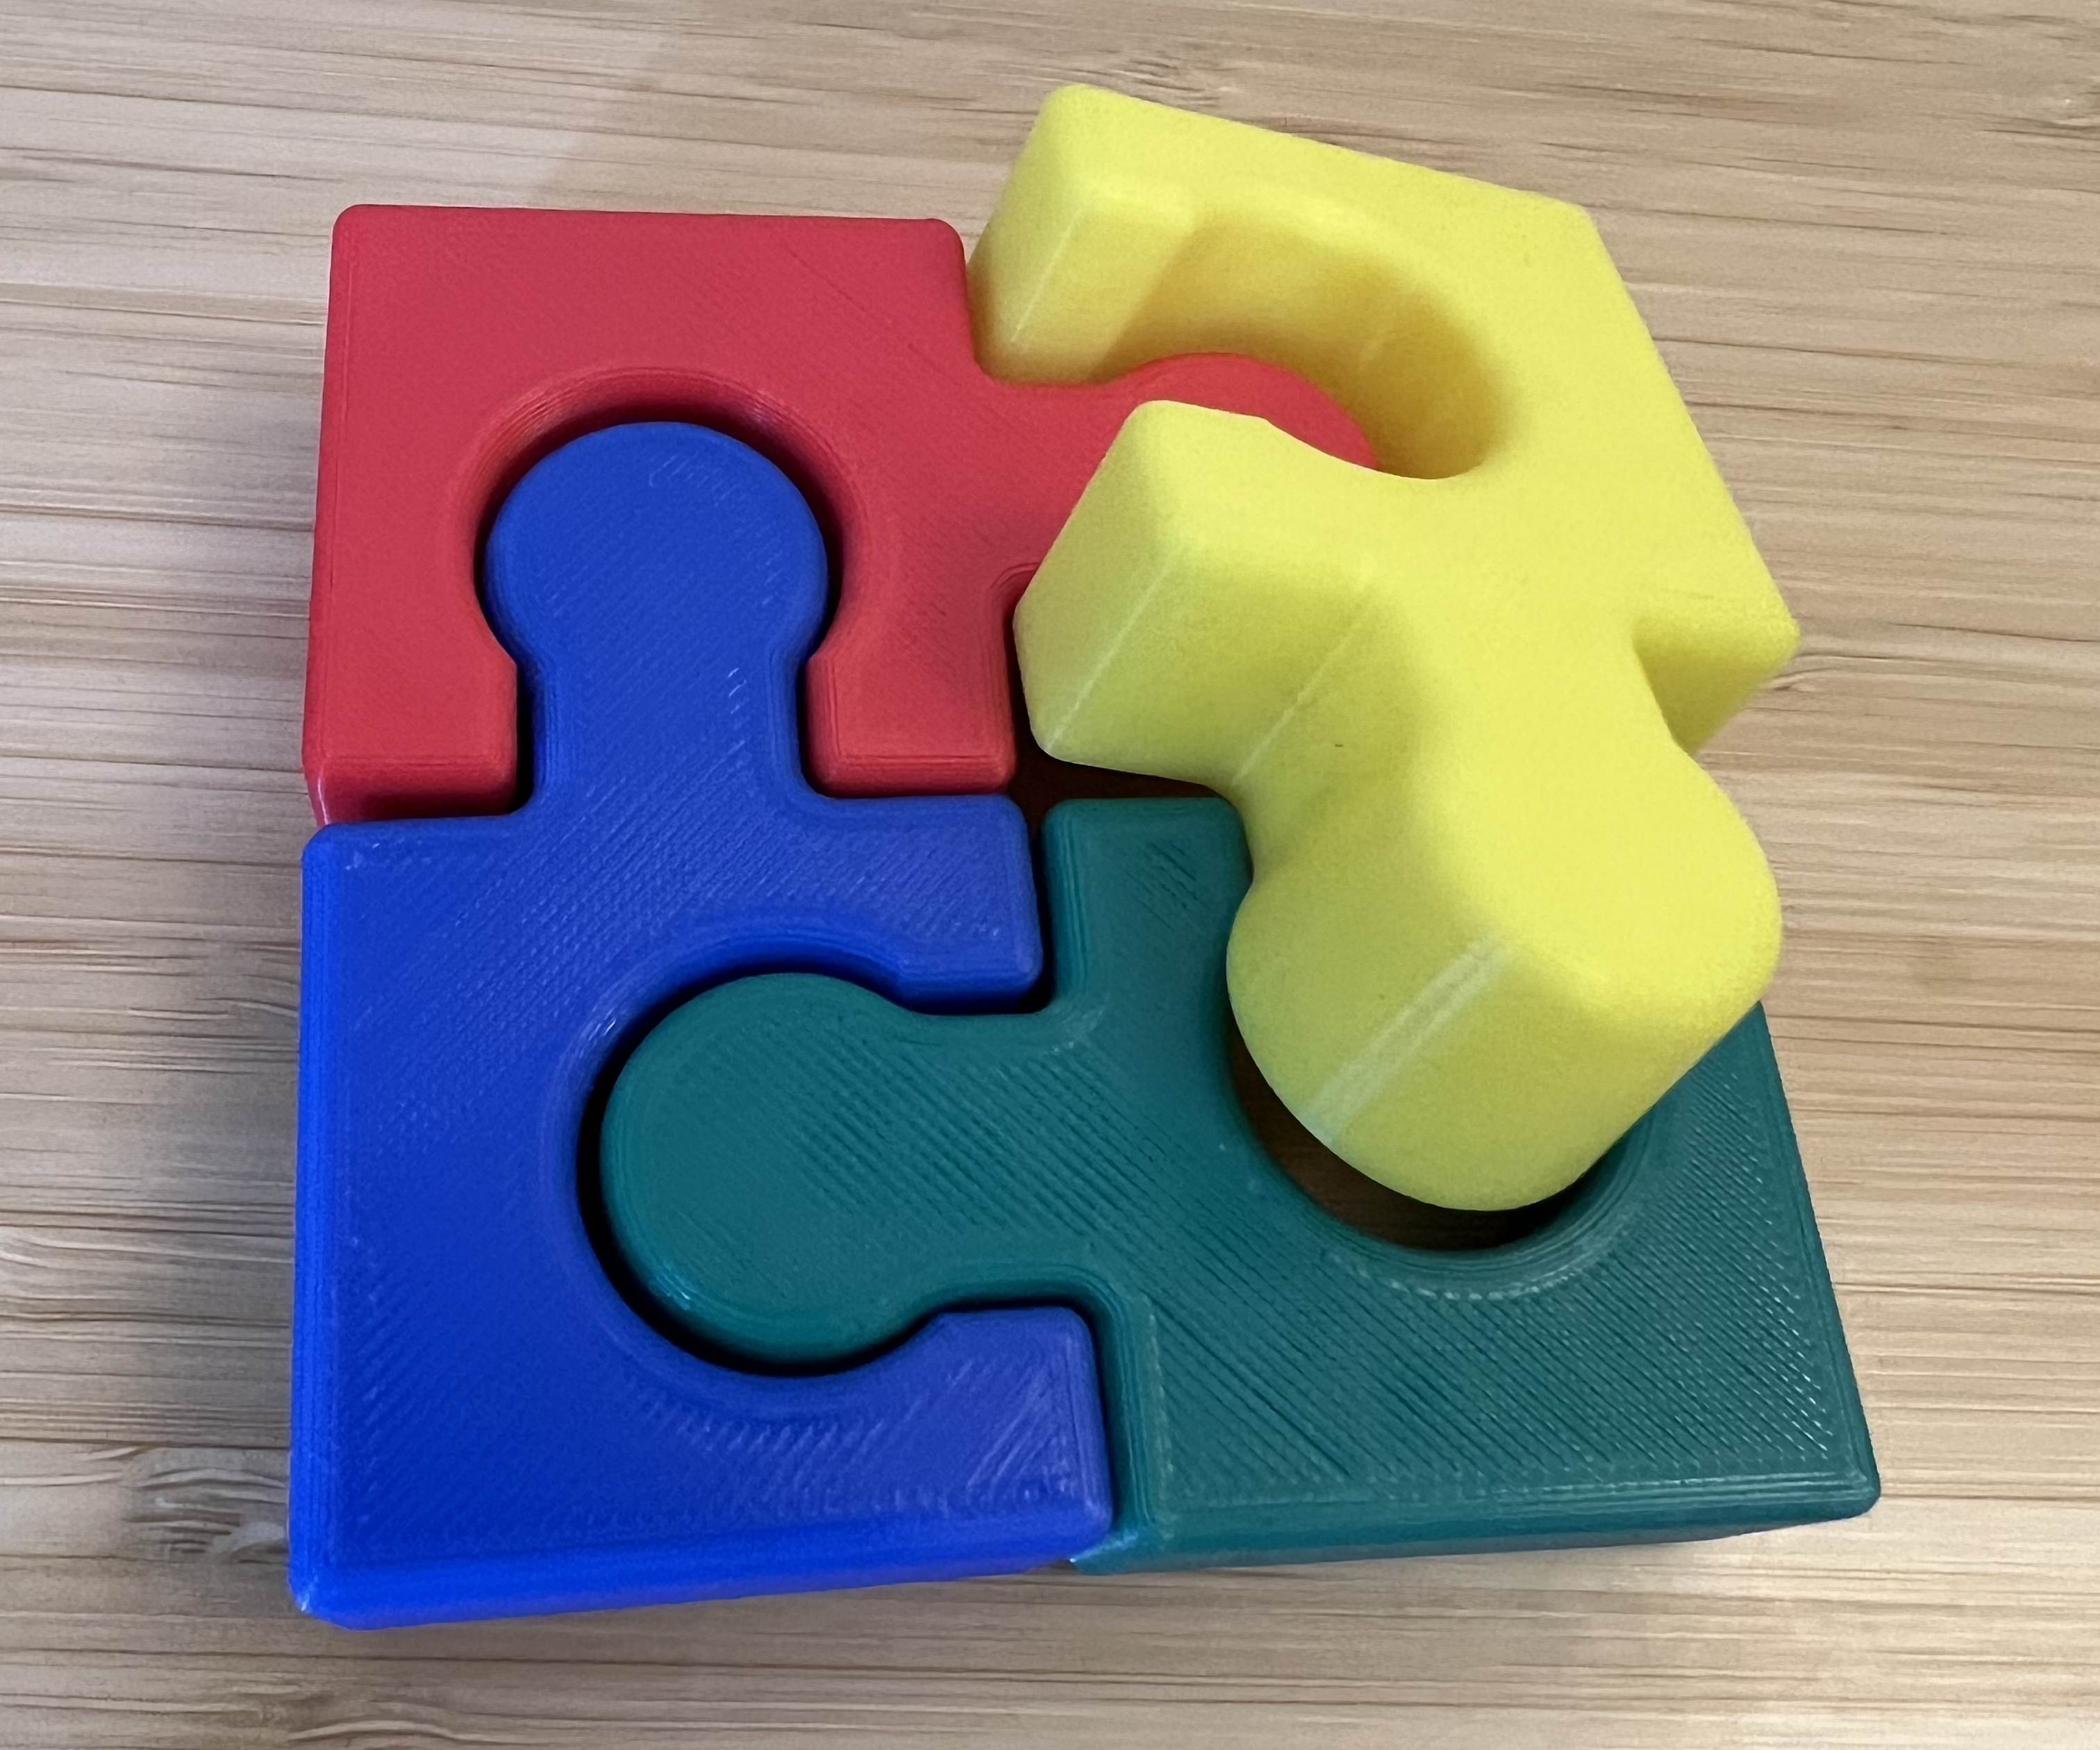 The Simply Impossible Puzzle